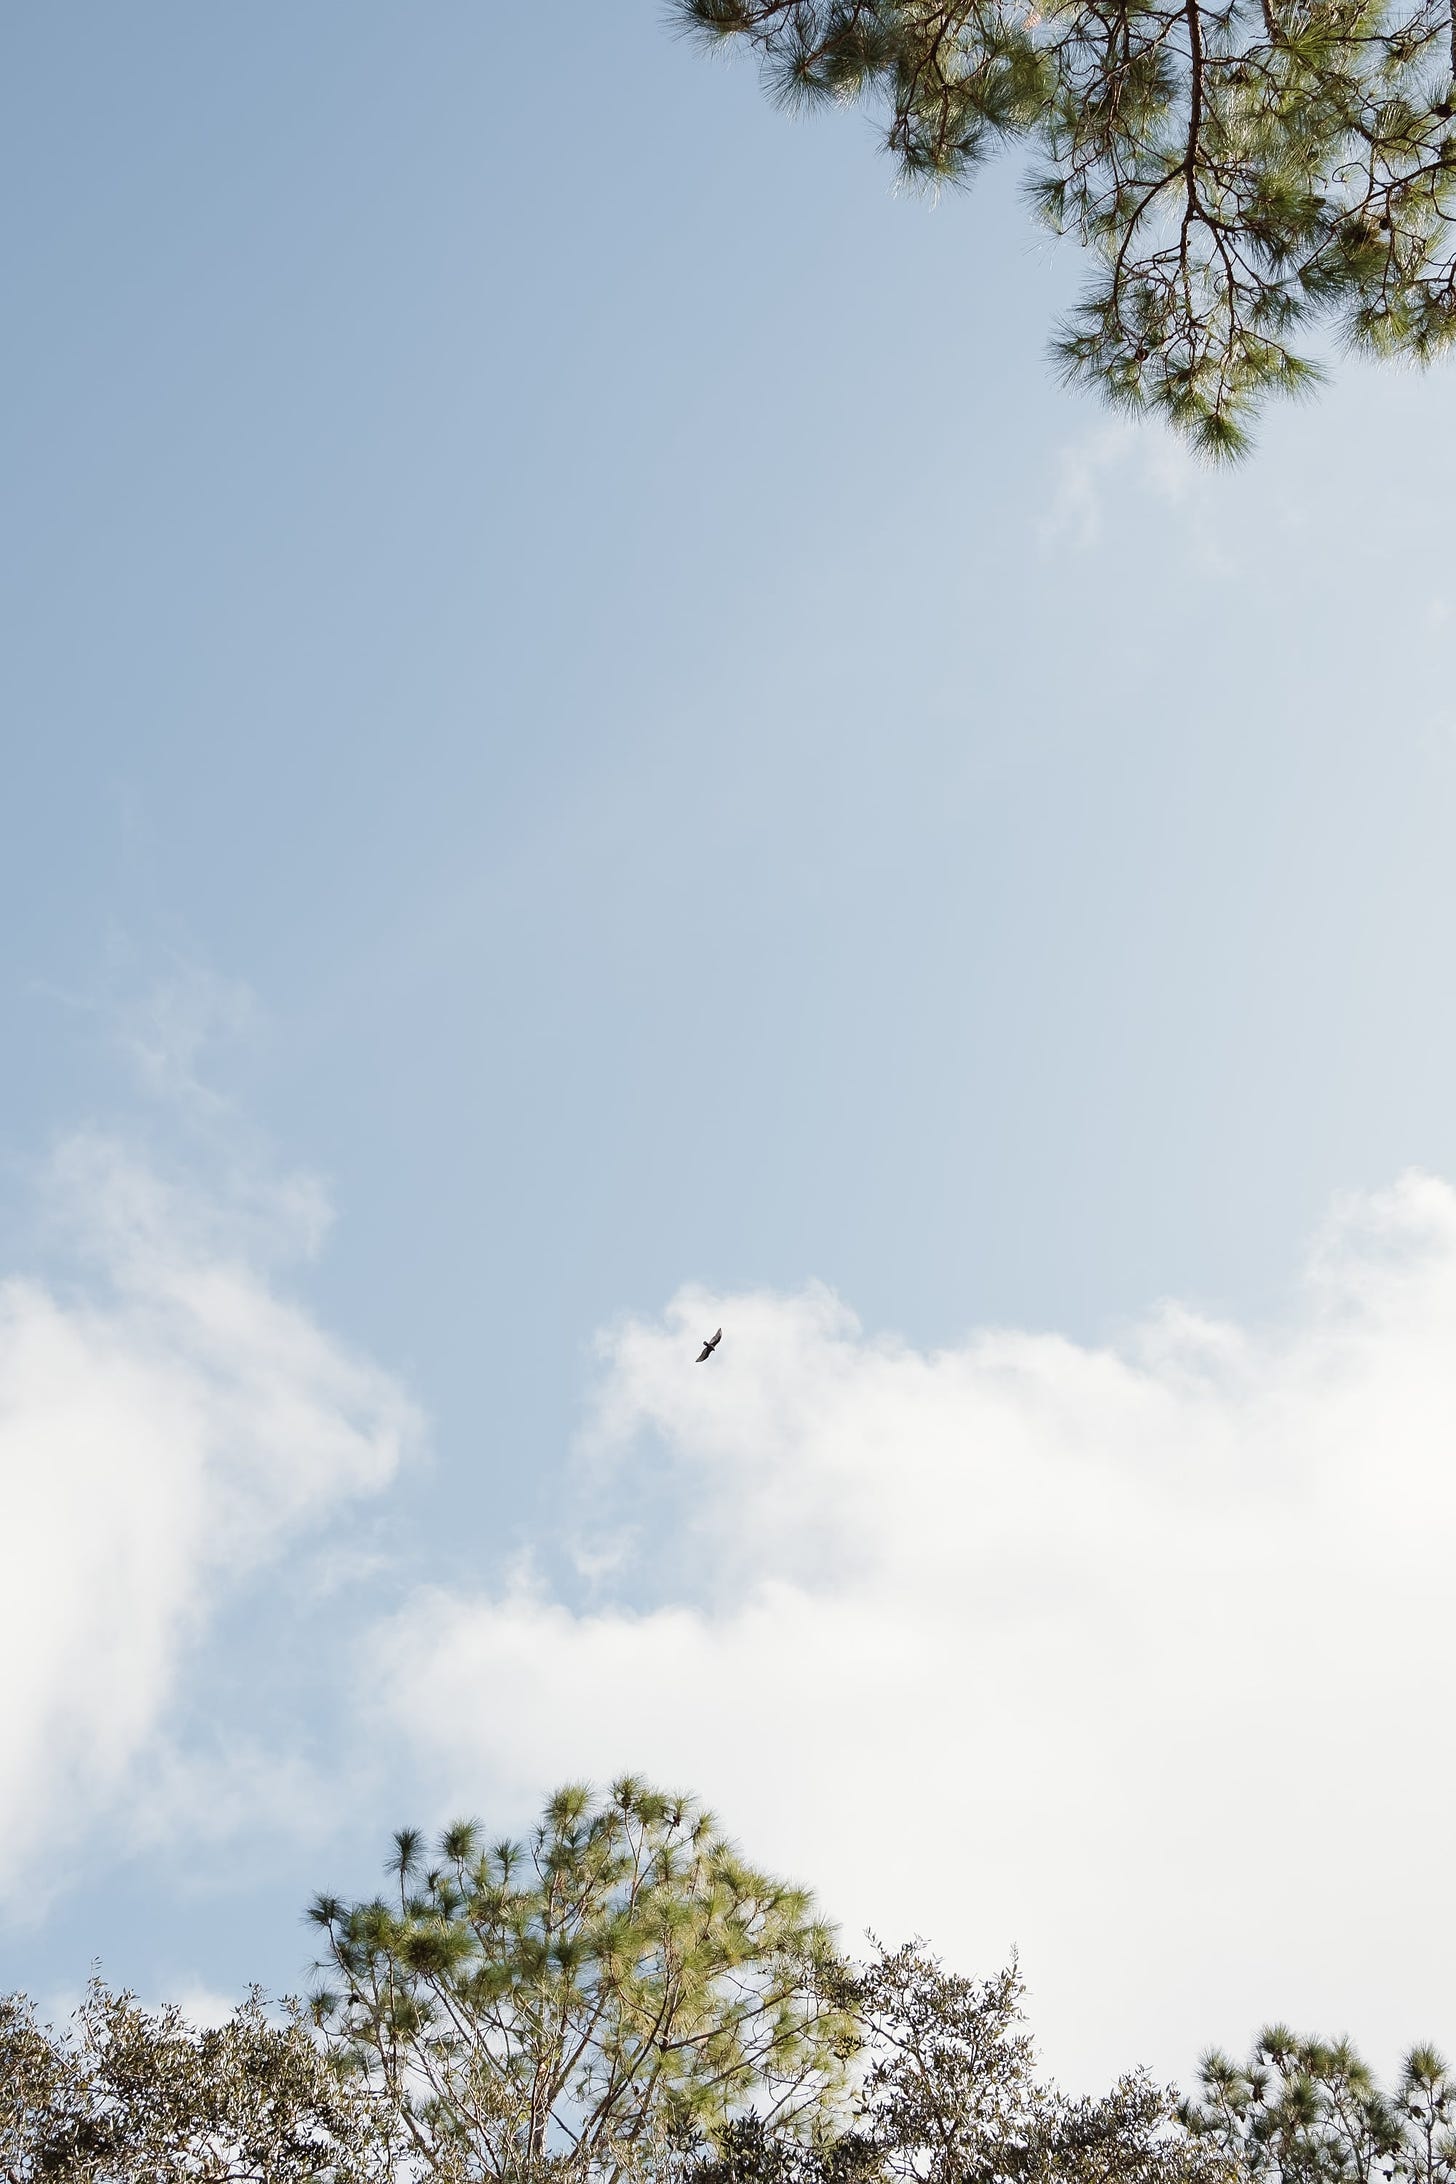 Looking up to the sky on a sunny day. A pine tree is in the top right edge of the frame and a large bird is flying in the centre.